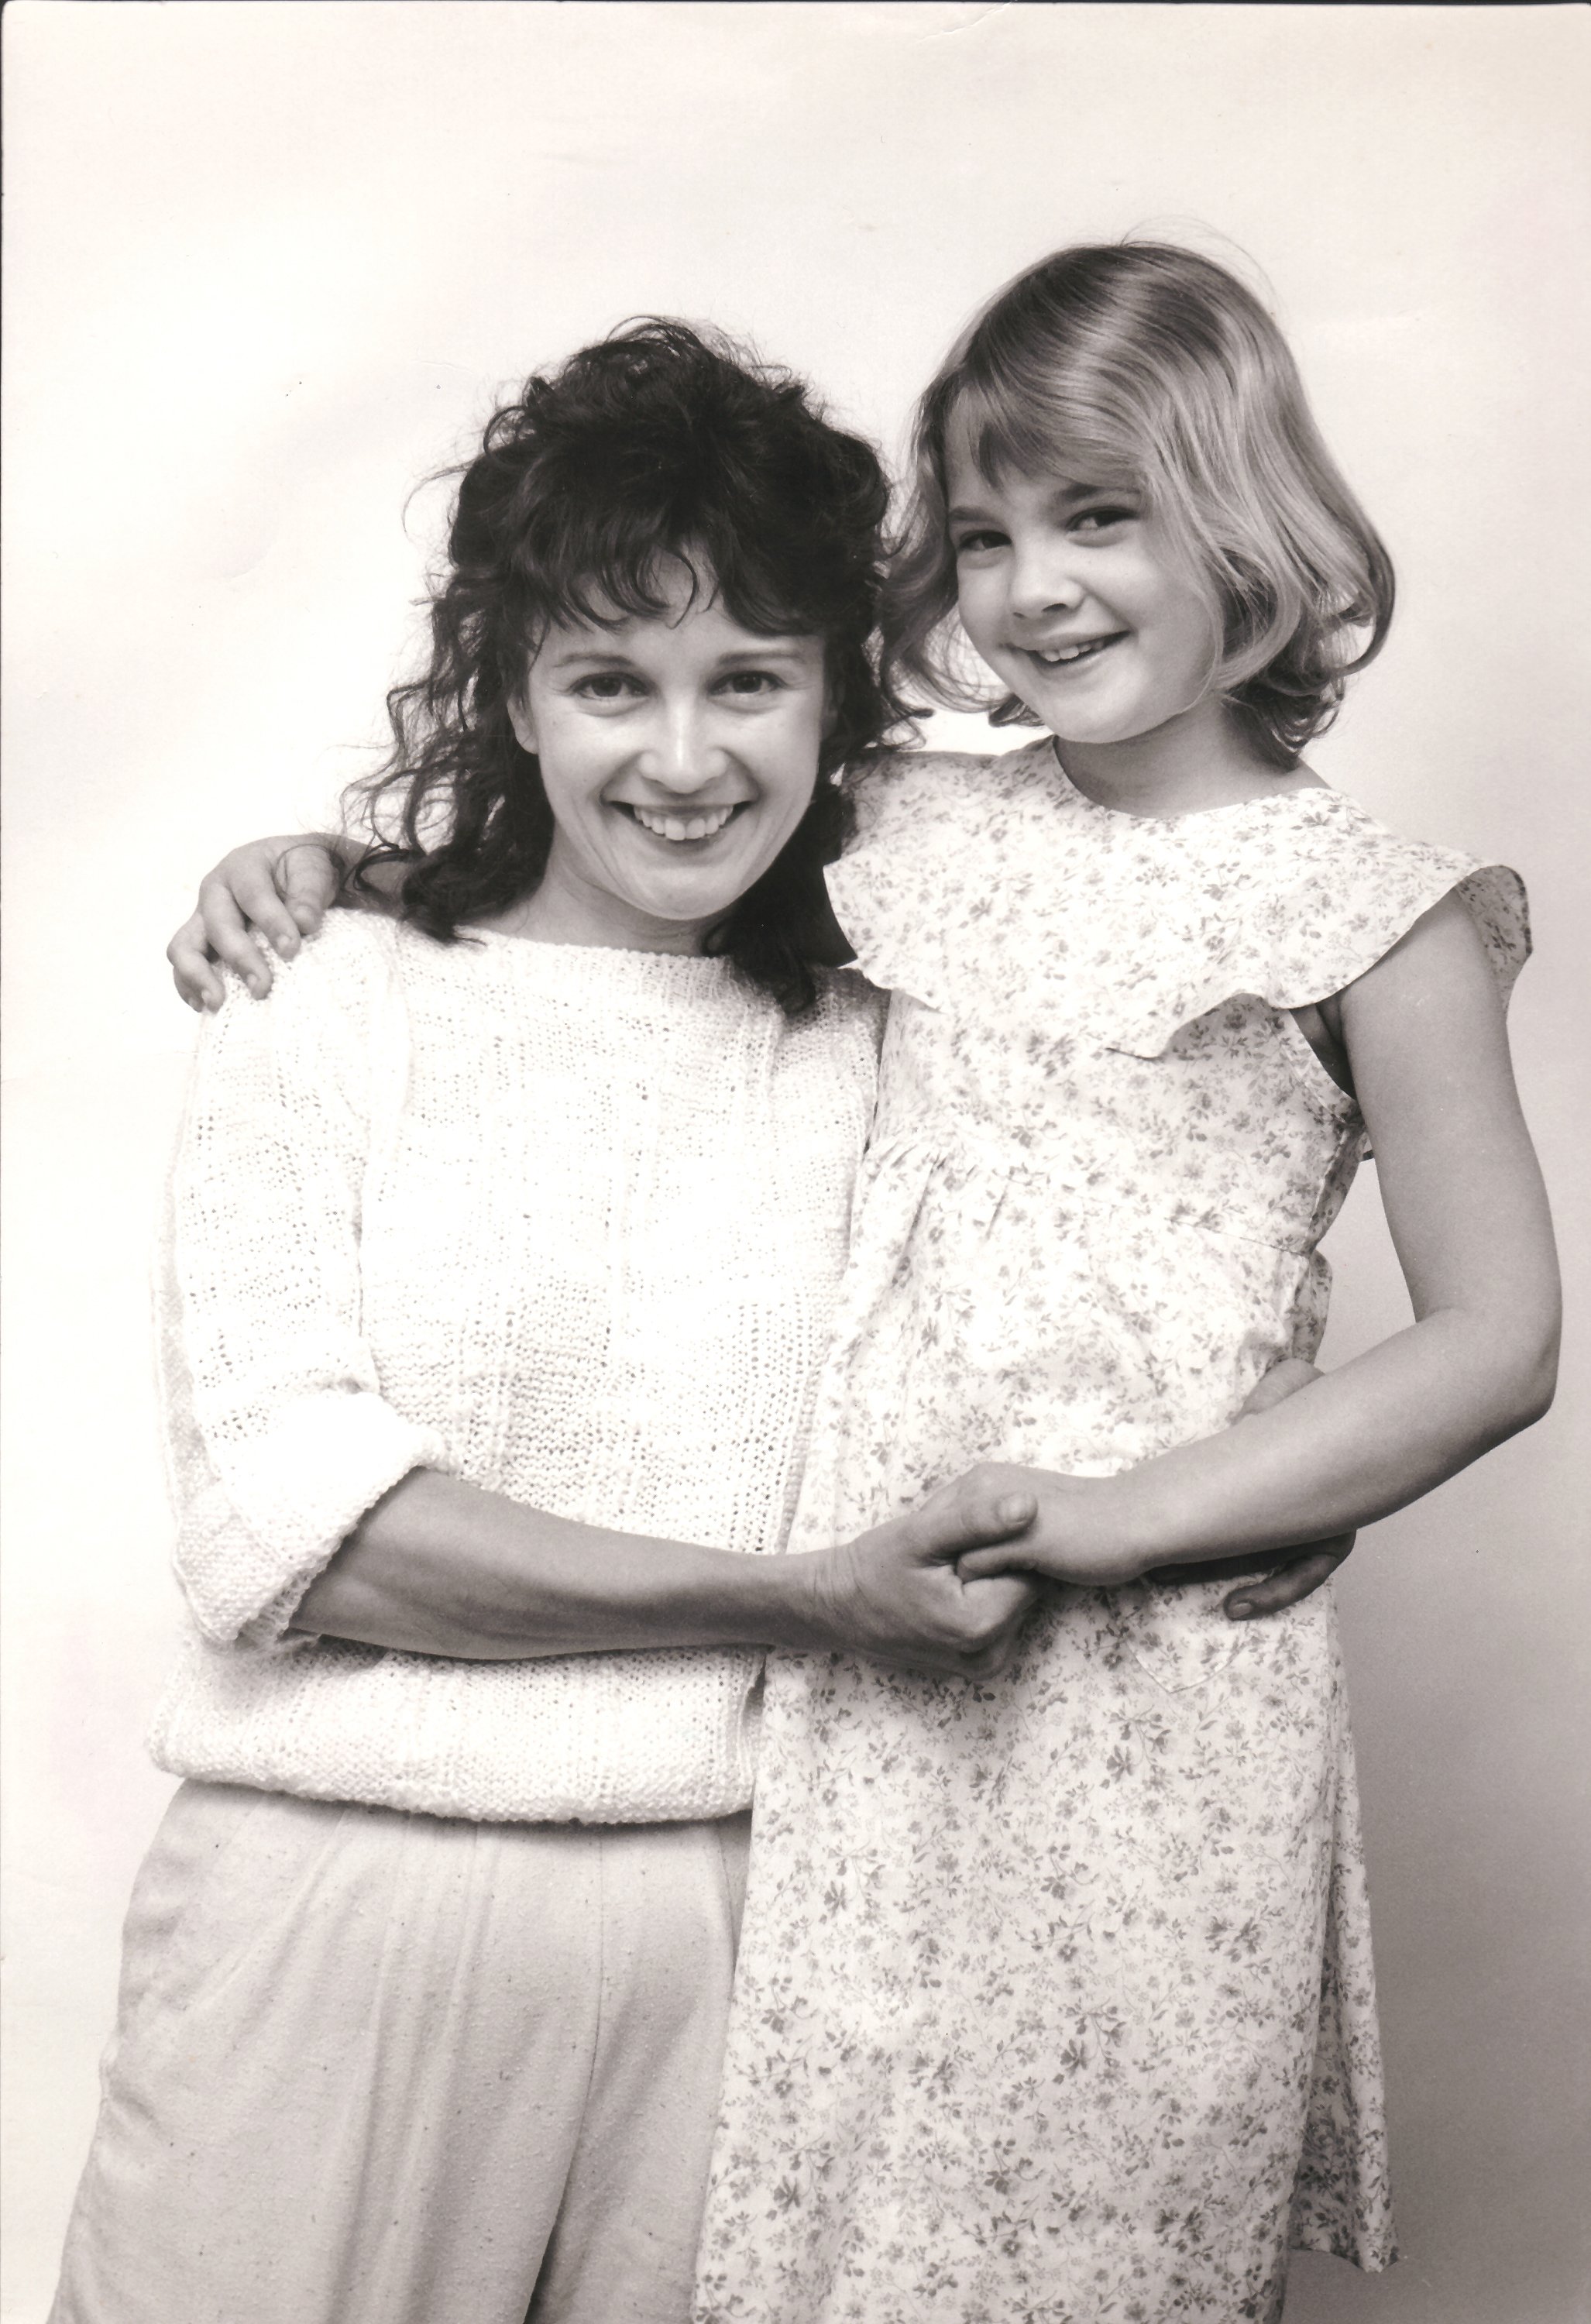 Drew Barrymore with mother Jaid Barrymore. File photo promoting the motion picture "E.T." in 1982 | Photo: GettyImages